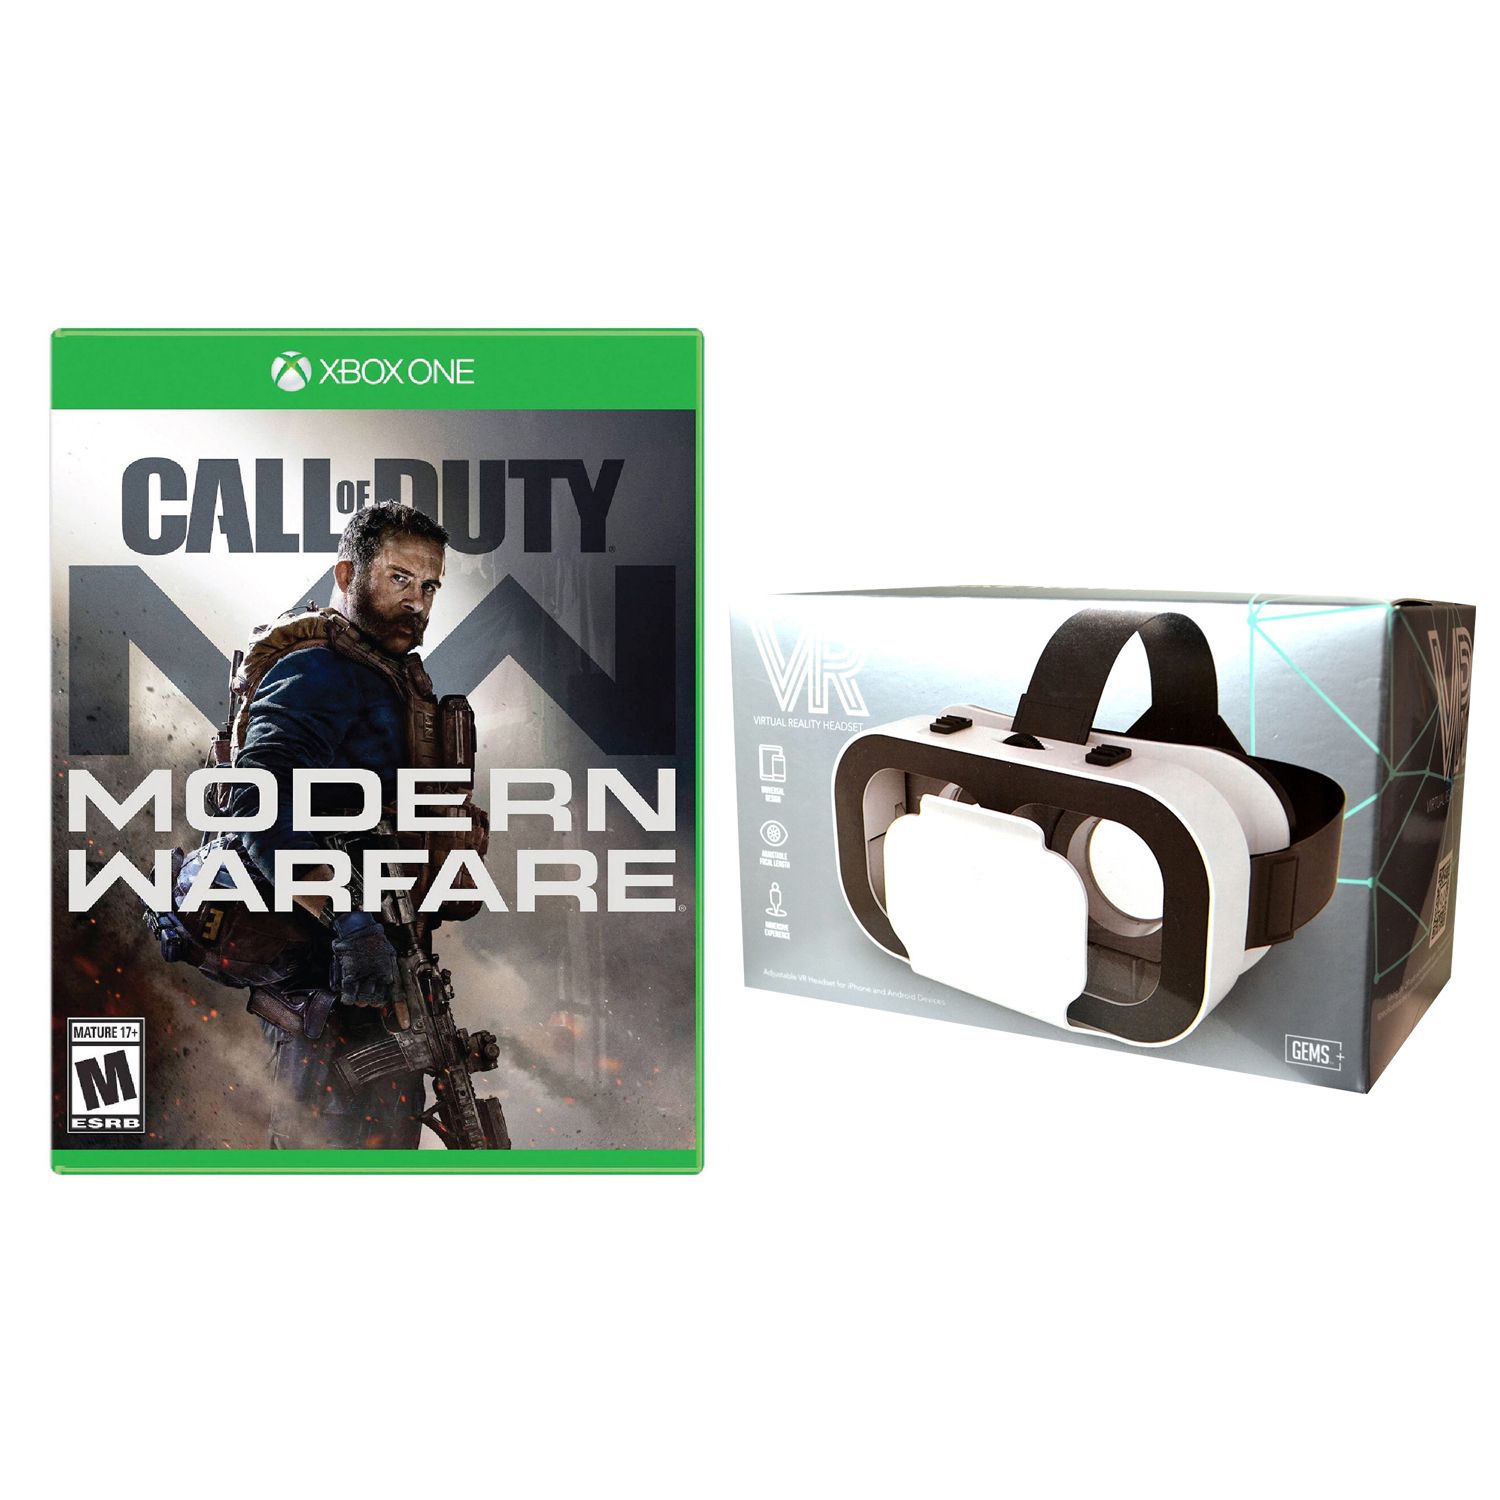 virtual reality games for xbox one